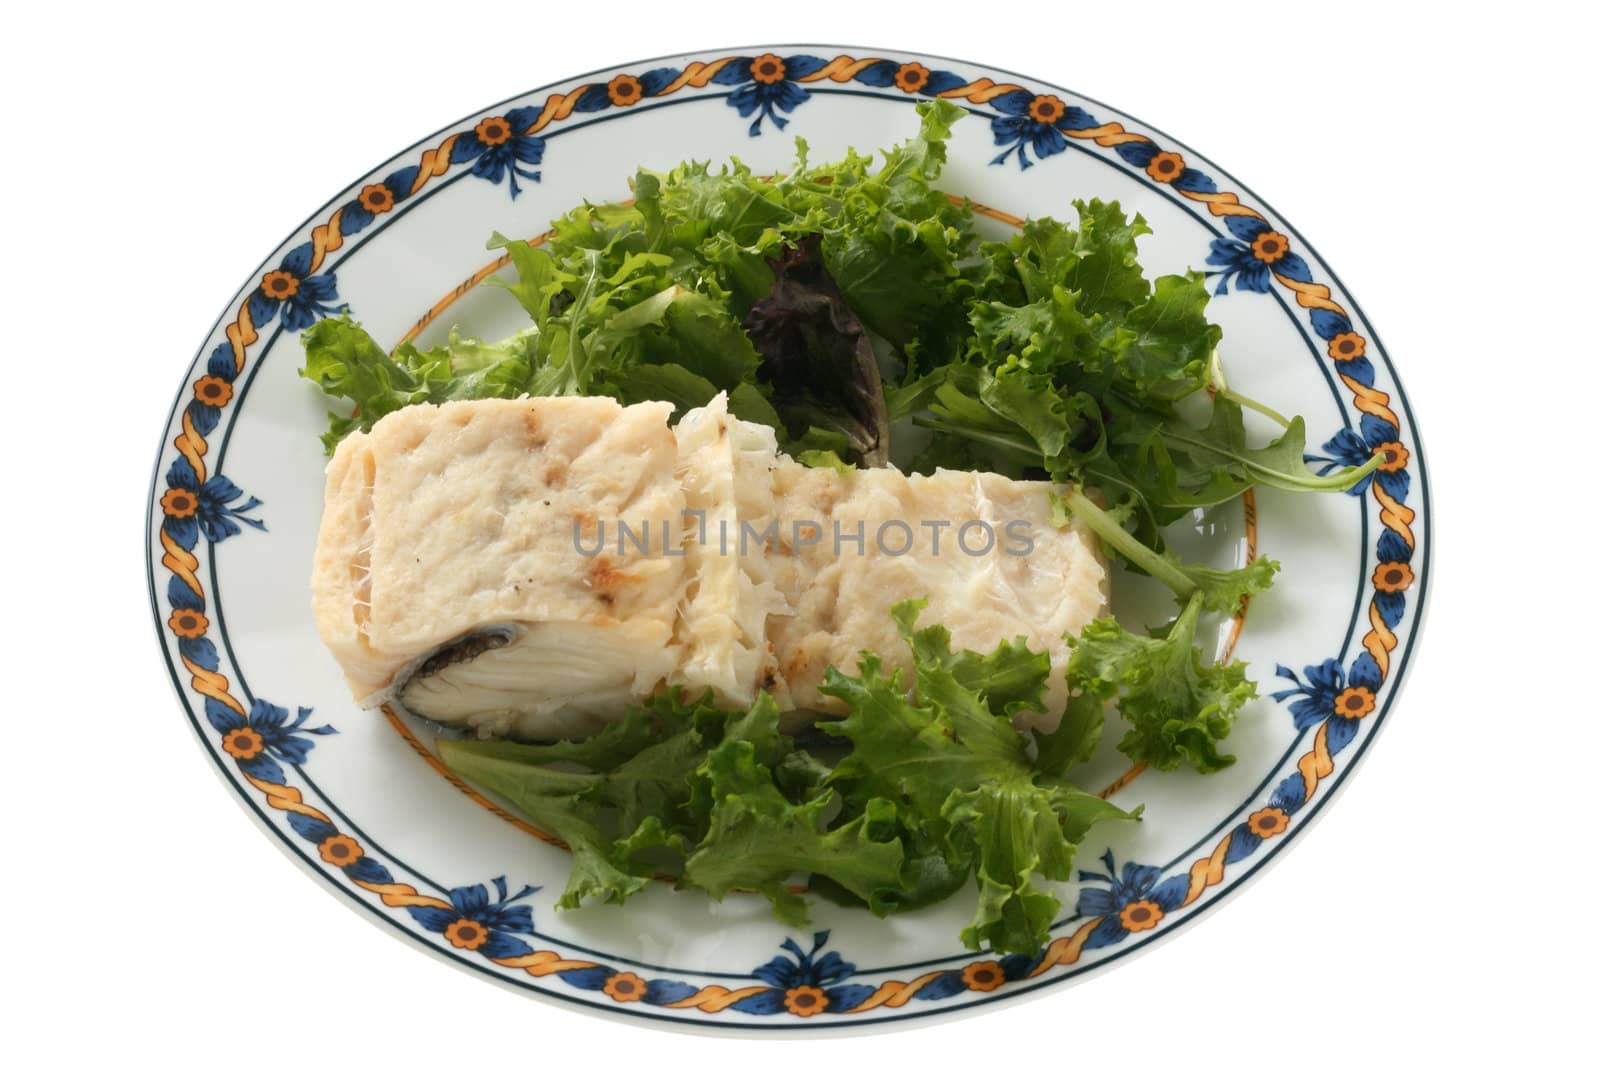 Boiled codfish with salad